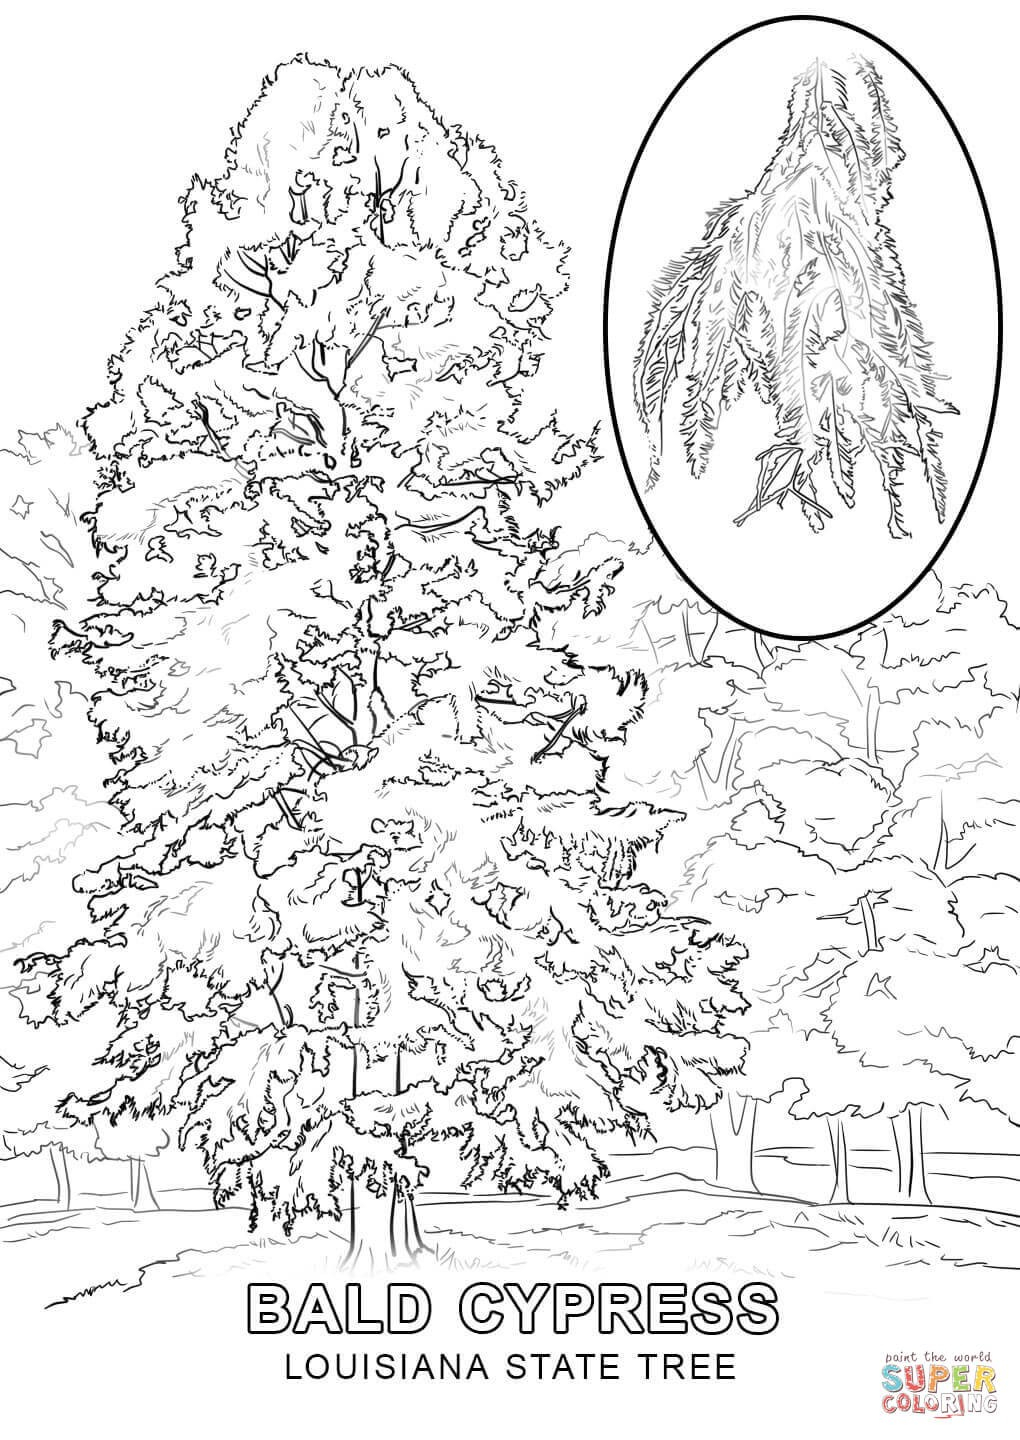 Alaska Flag Coloring Page Alaska State Tree Coloring Page Luxury New State Flag Illinois